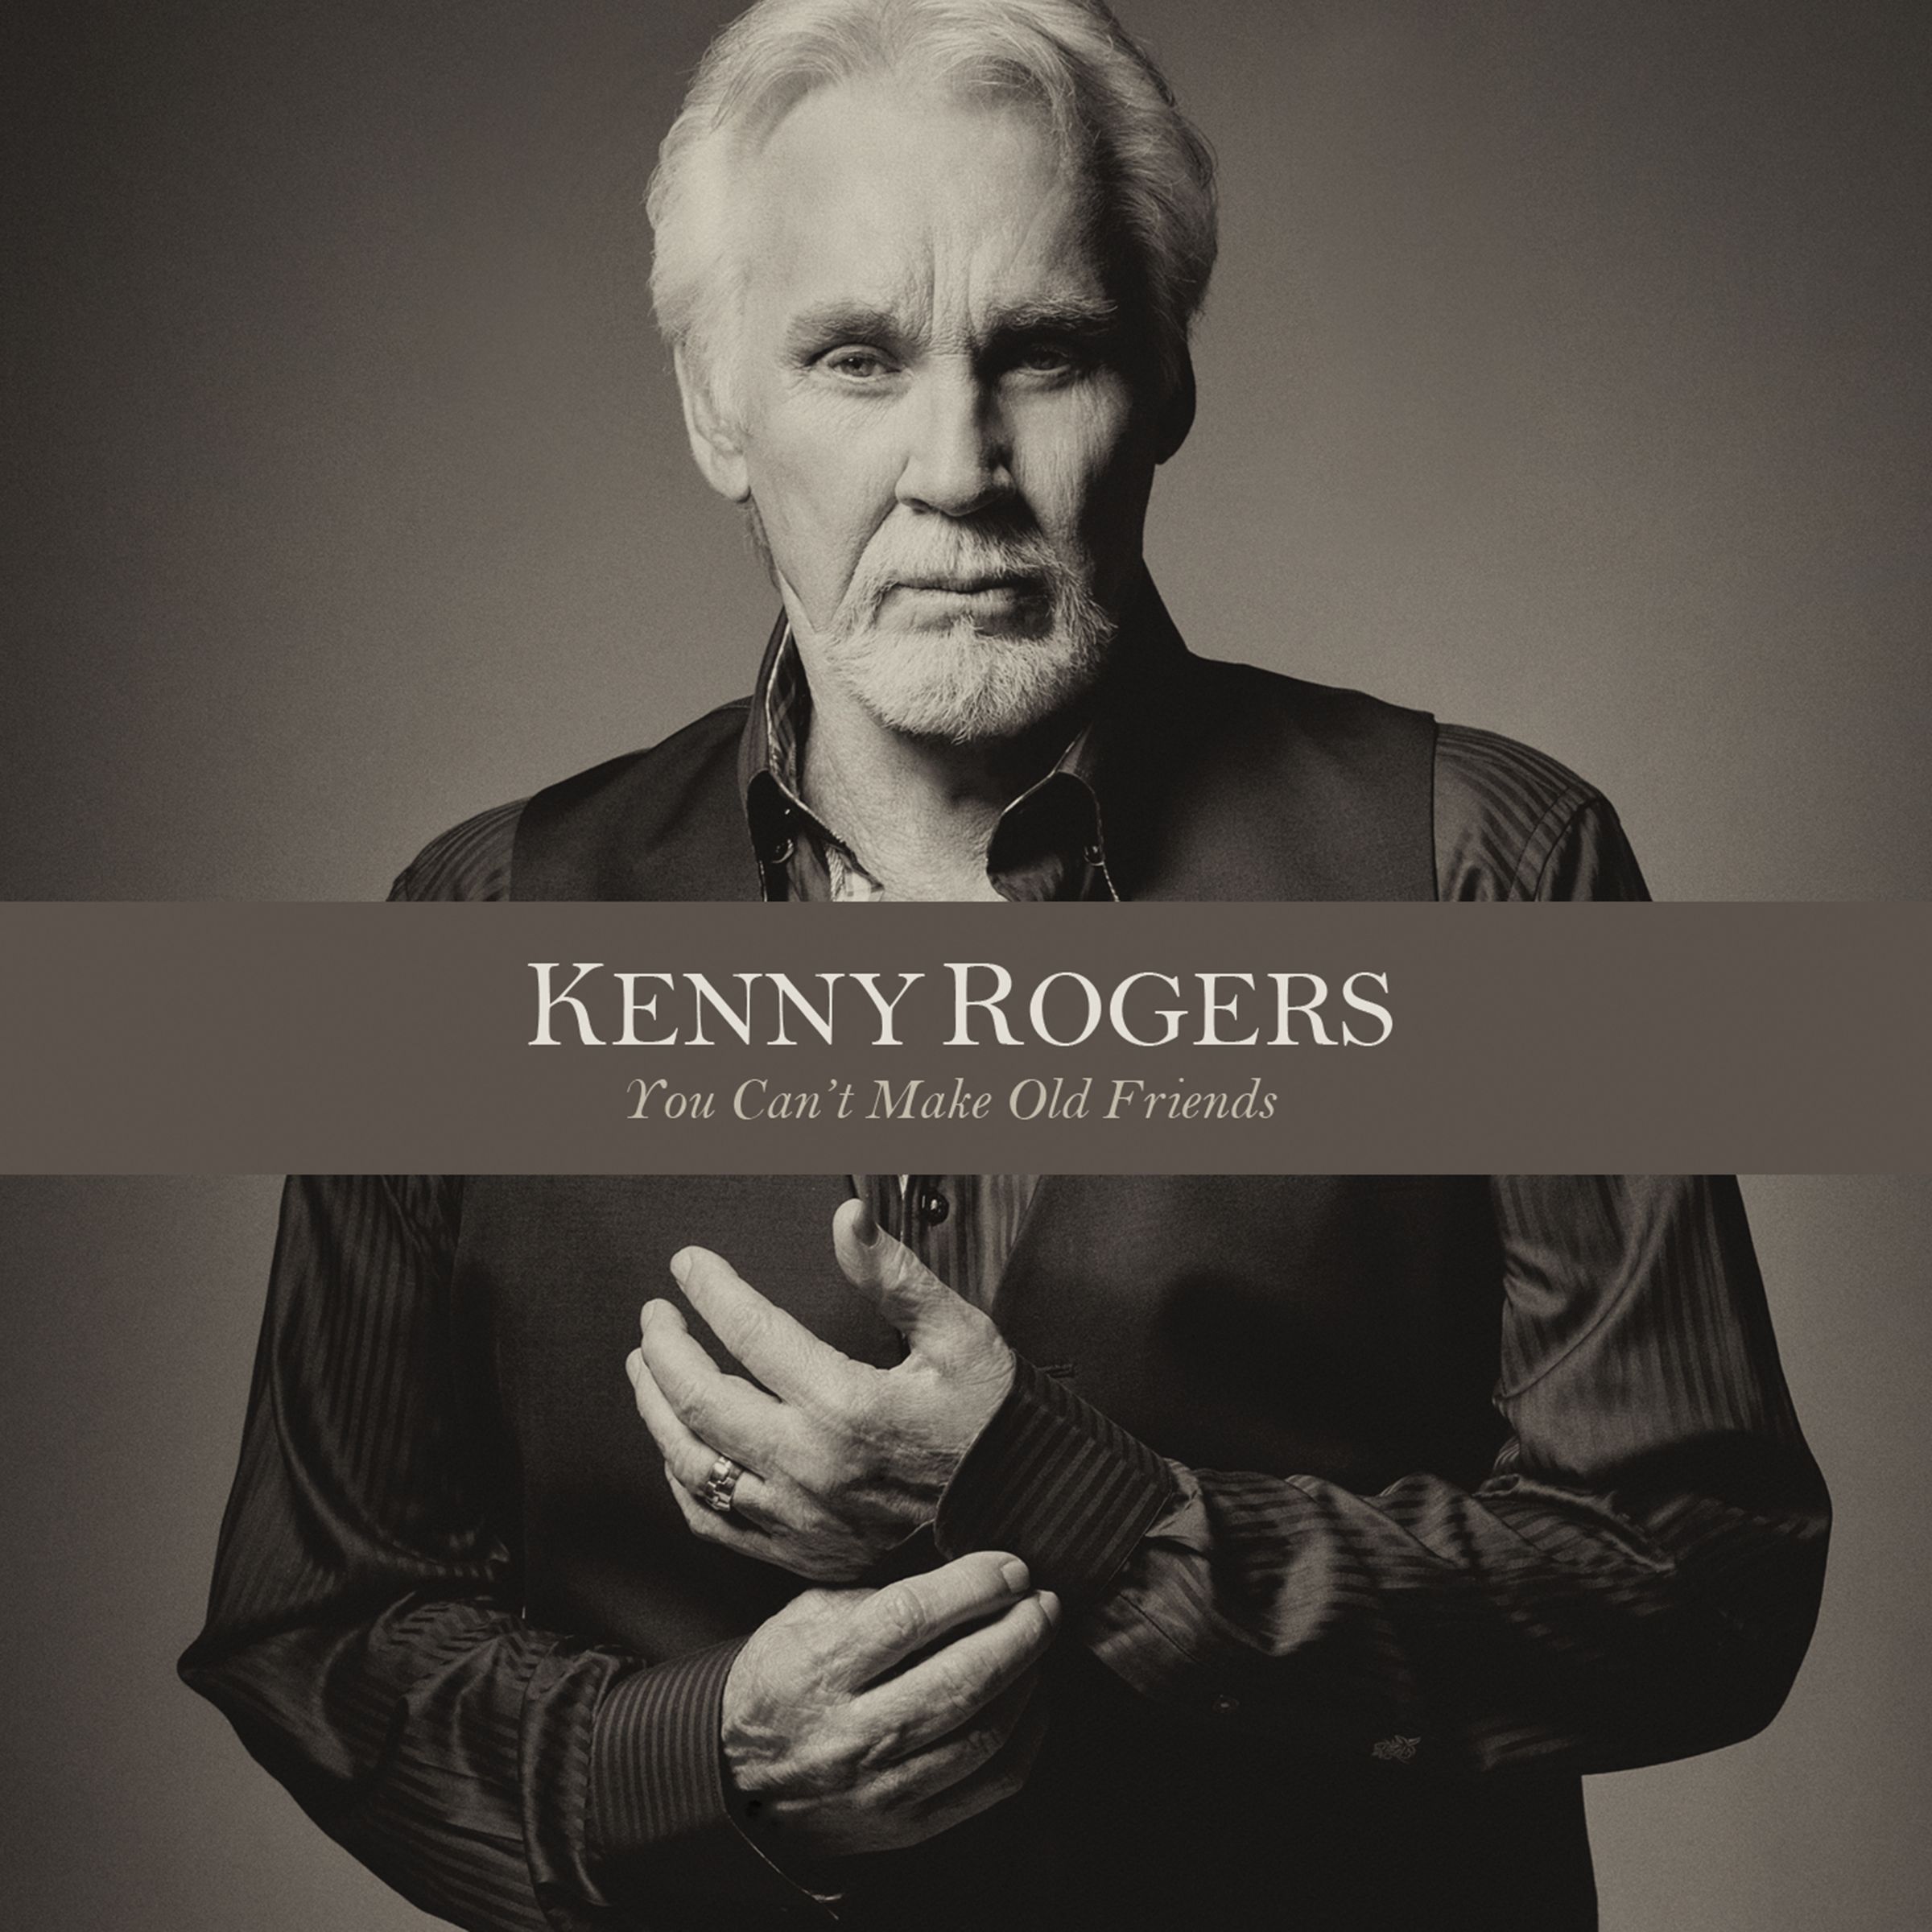 Kenny Rogers – You Can’t Make Old Friends (2013) [HDTracks FLAC 24bit/96kHz]